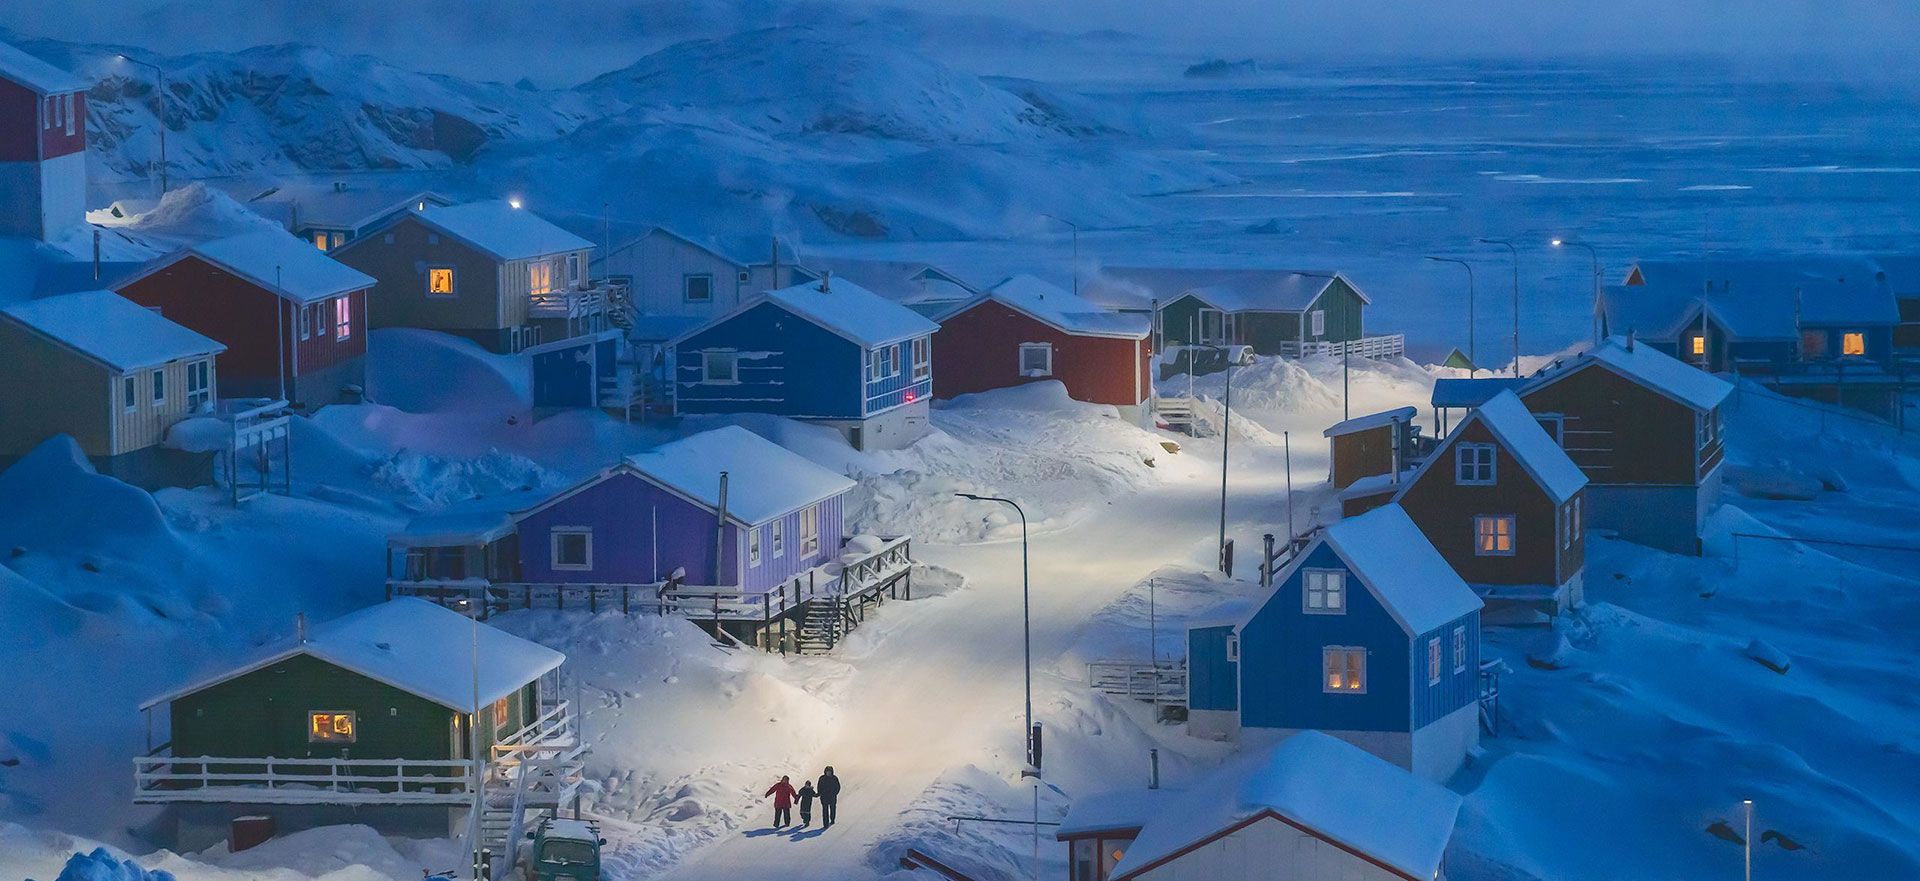 Fig. Weimin Chu "Greenlandic Winter", winner of the National Geographic Travel Photographer of the Year 2019